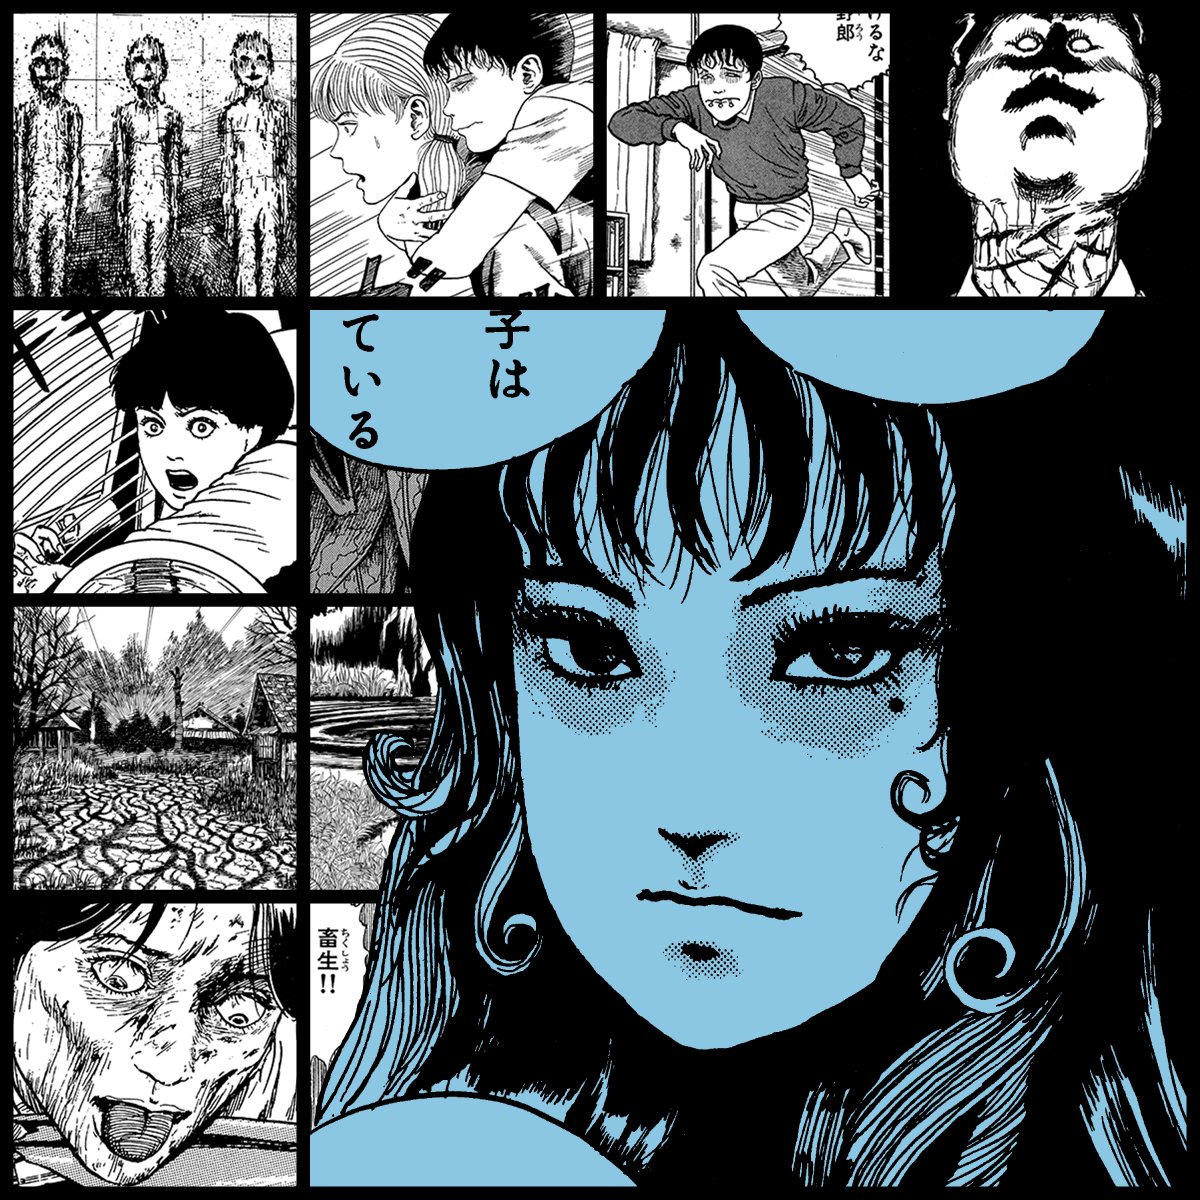 TOMIE by Junji Ito #1408